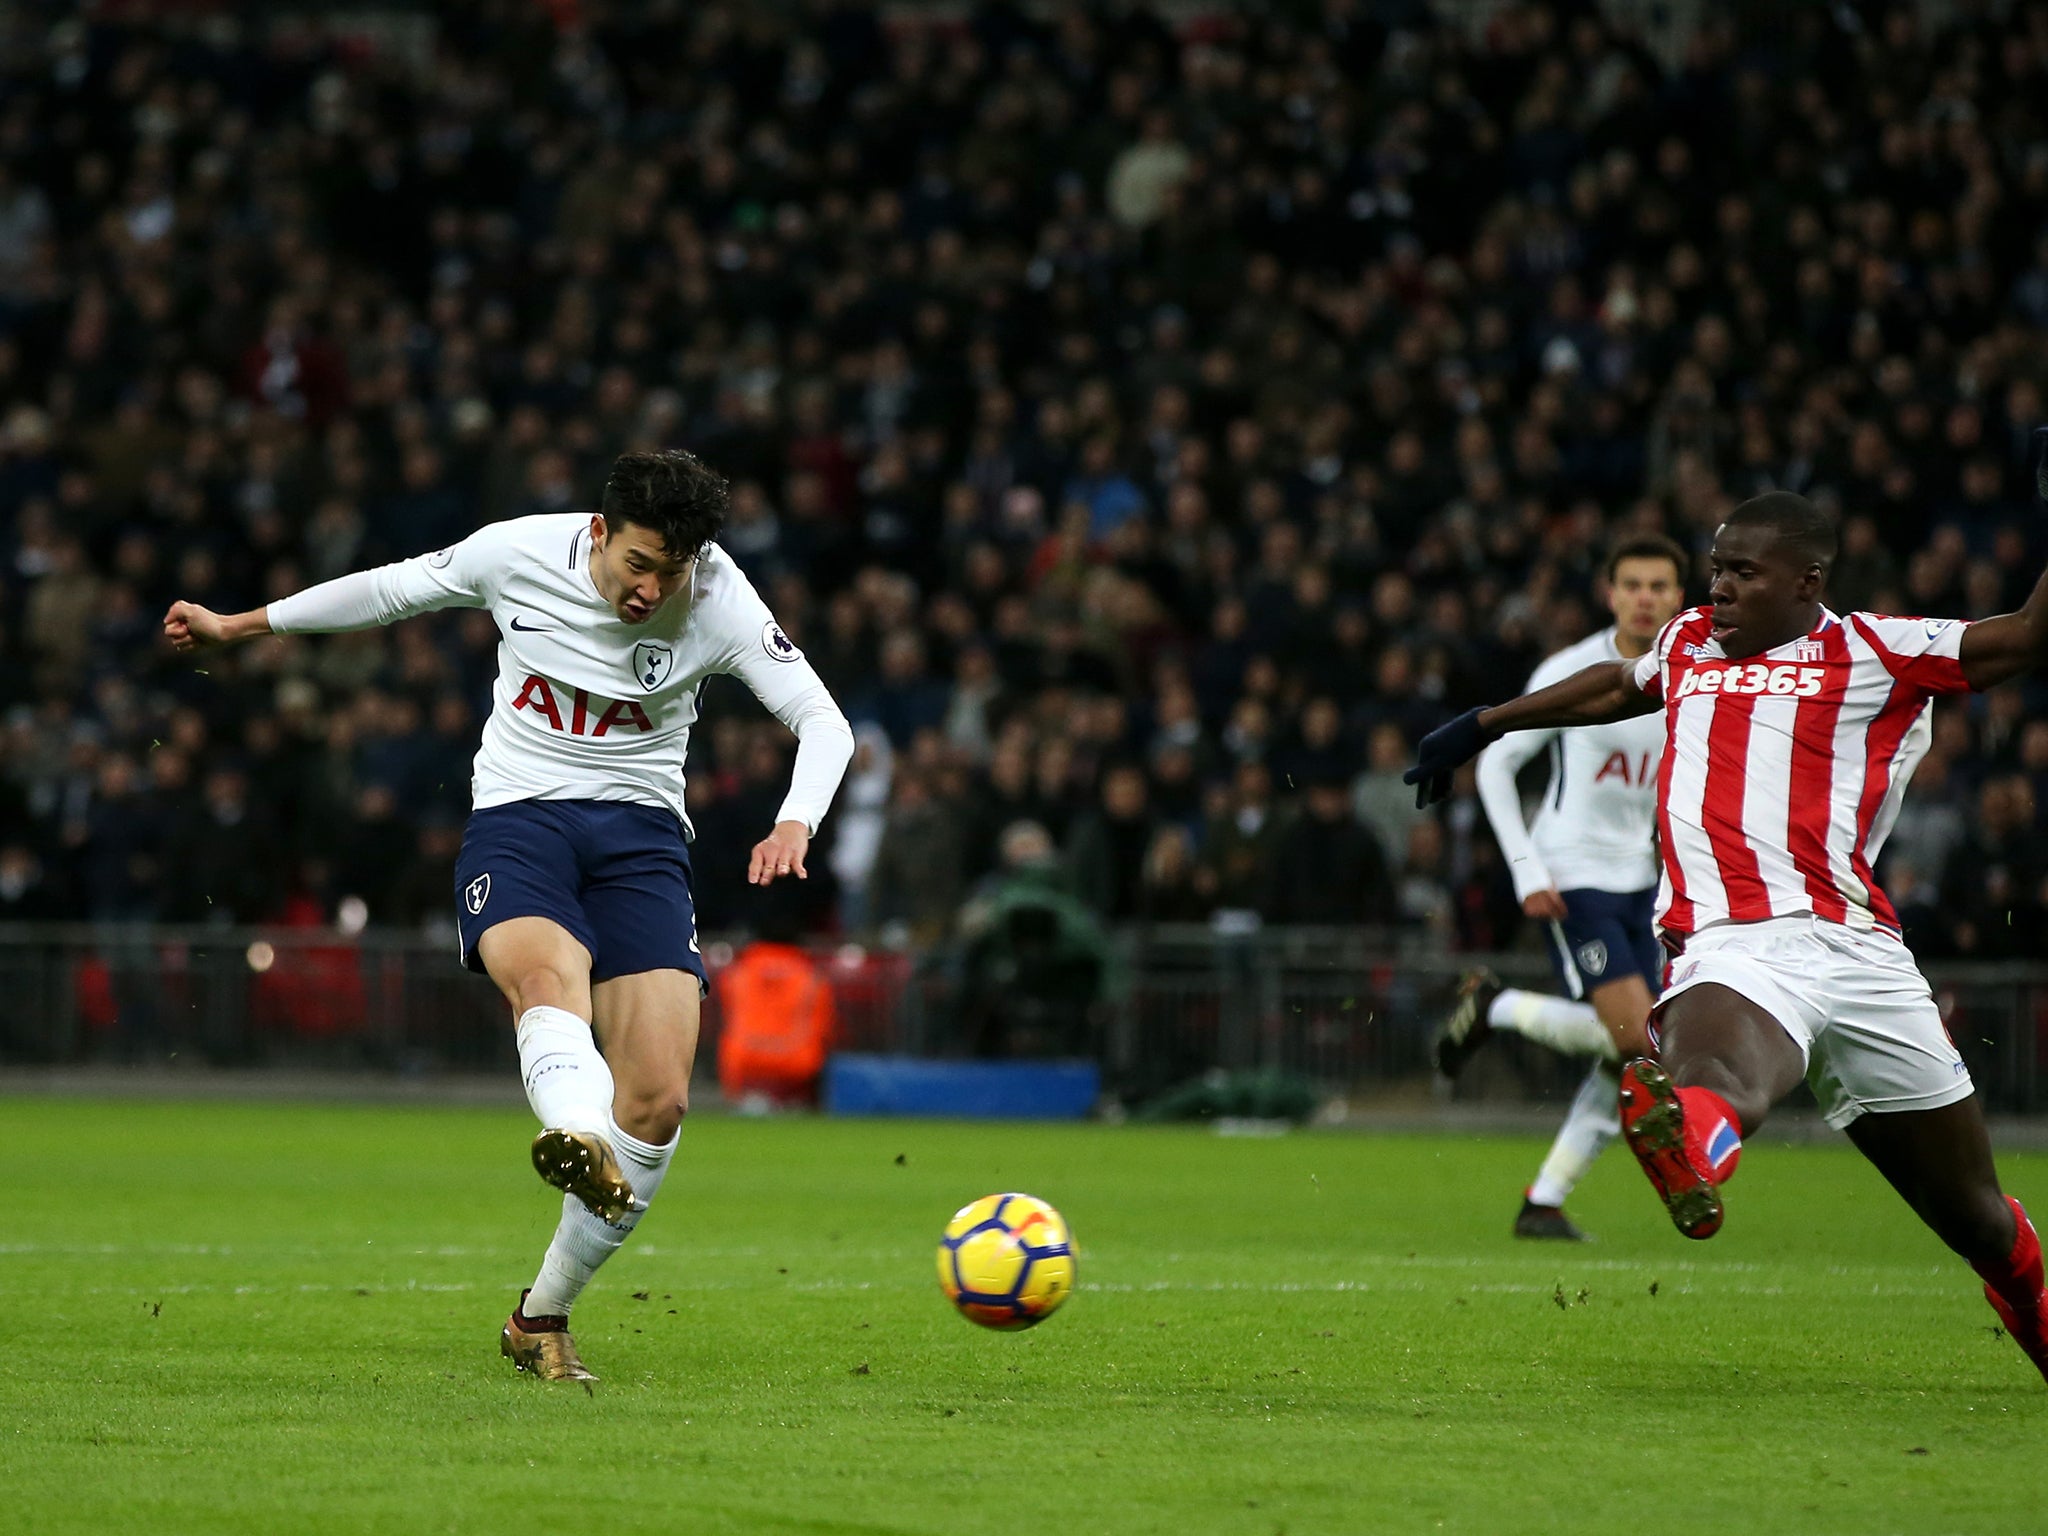 Son Heung-min fires into the back of the net to score Tottenham's second against Stoke